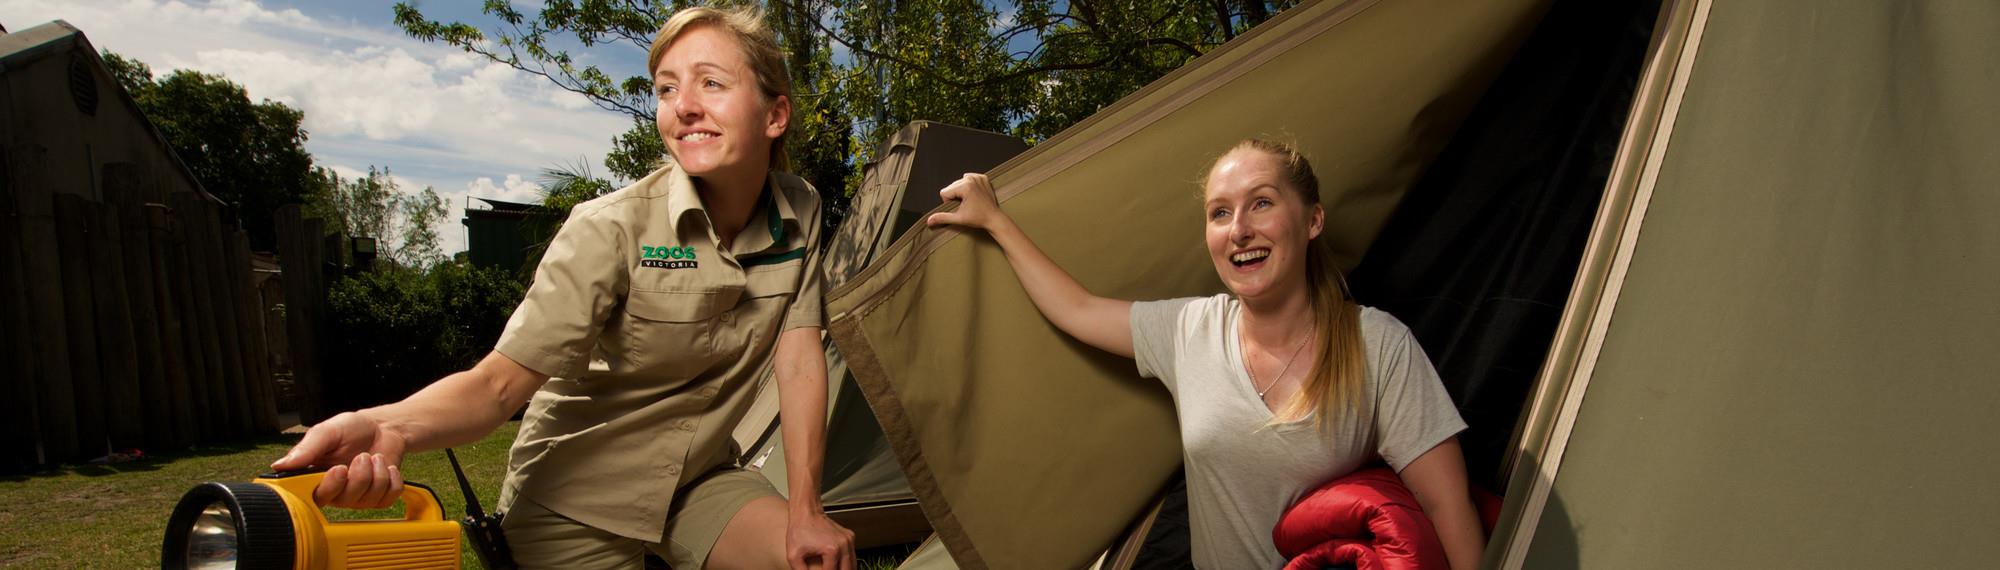 A female zoo worker crouching and holding a torch while another woman looks out of a tent door flap.